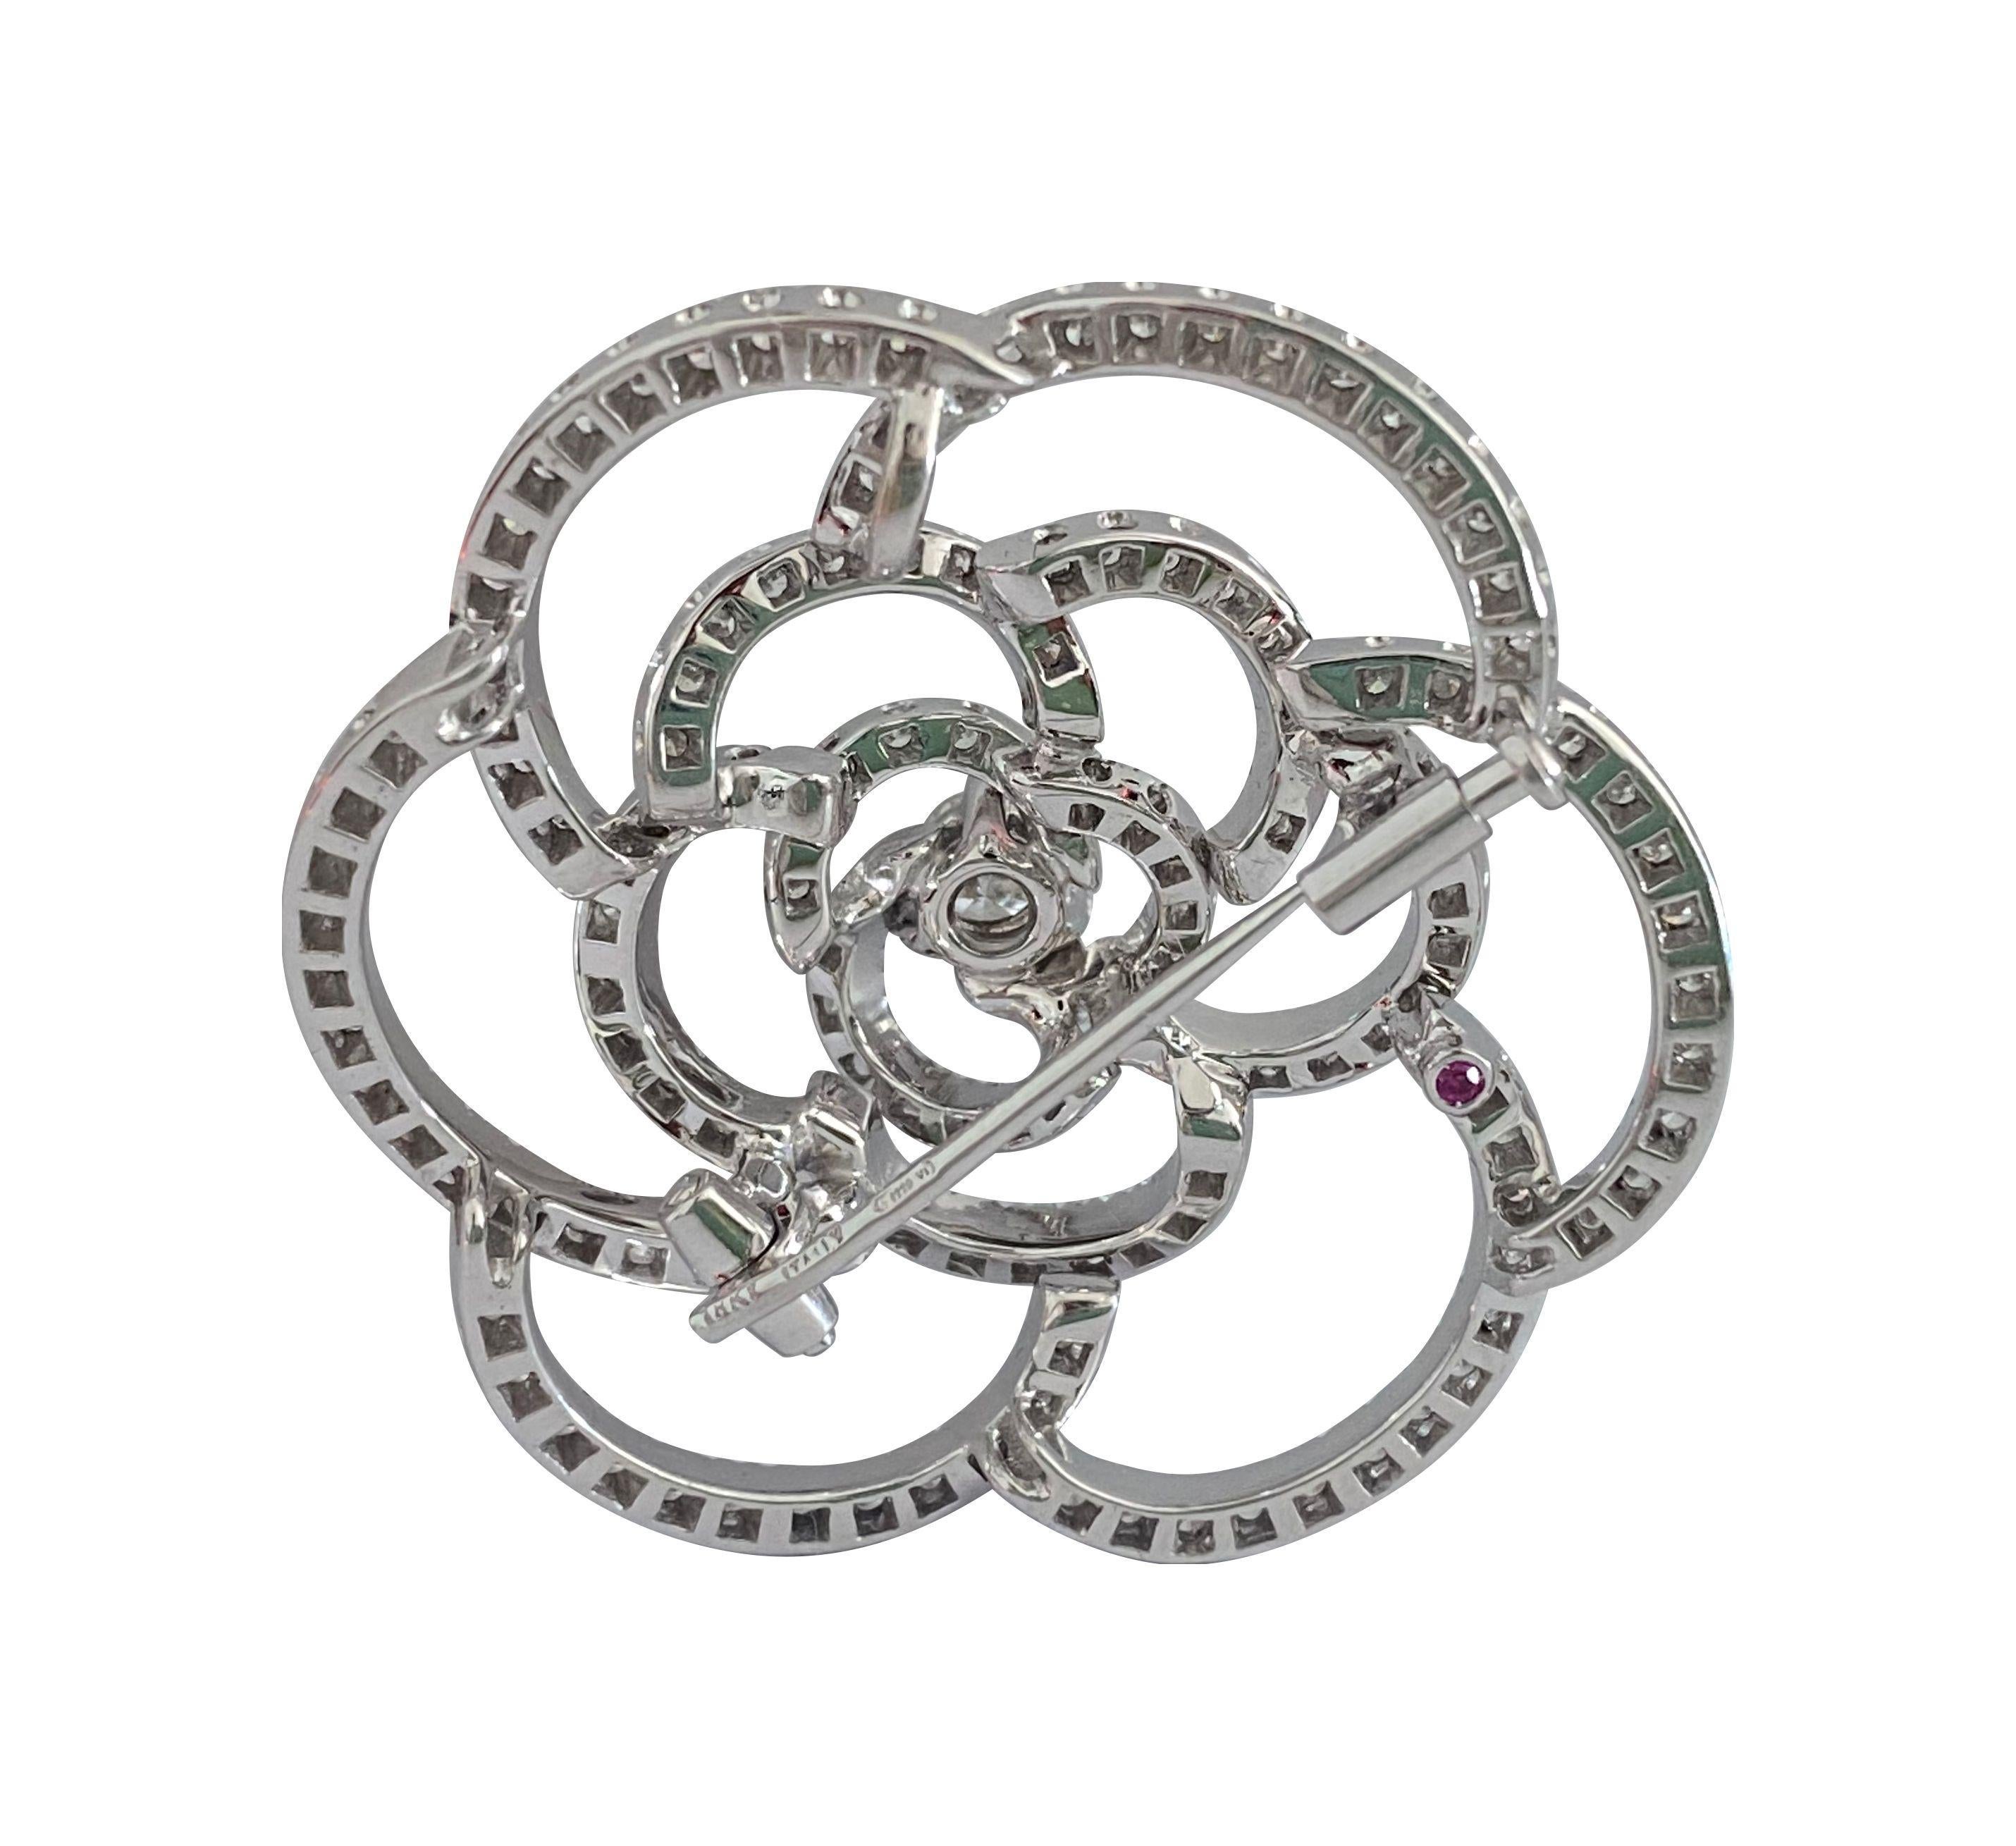 Crafted from 18k white gold, this exquisite diamond pin features a total carat weight of 5.50 carats of round brilliant-cut diamonds. With VVS2-VS1 clarity and E-F color, these diamonds exhibit exceptional brilliance and quality. Made in Italy, this